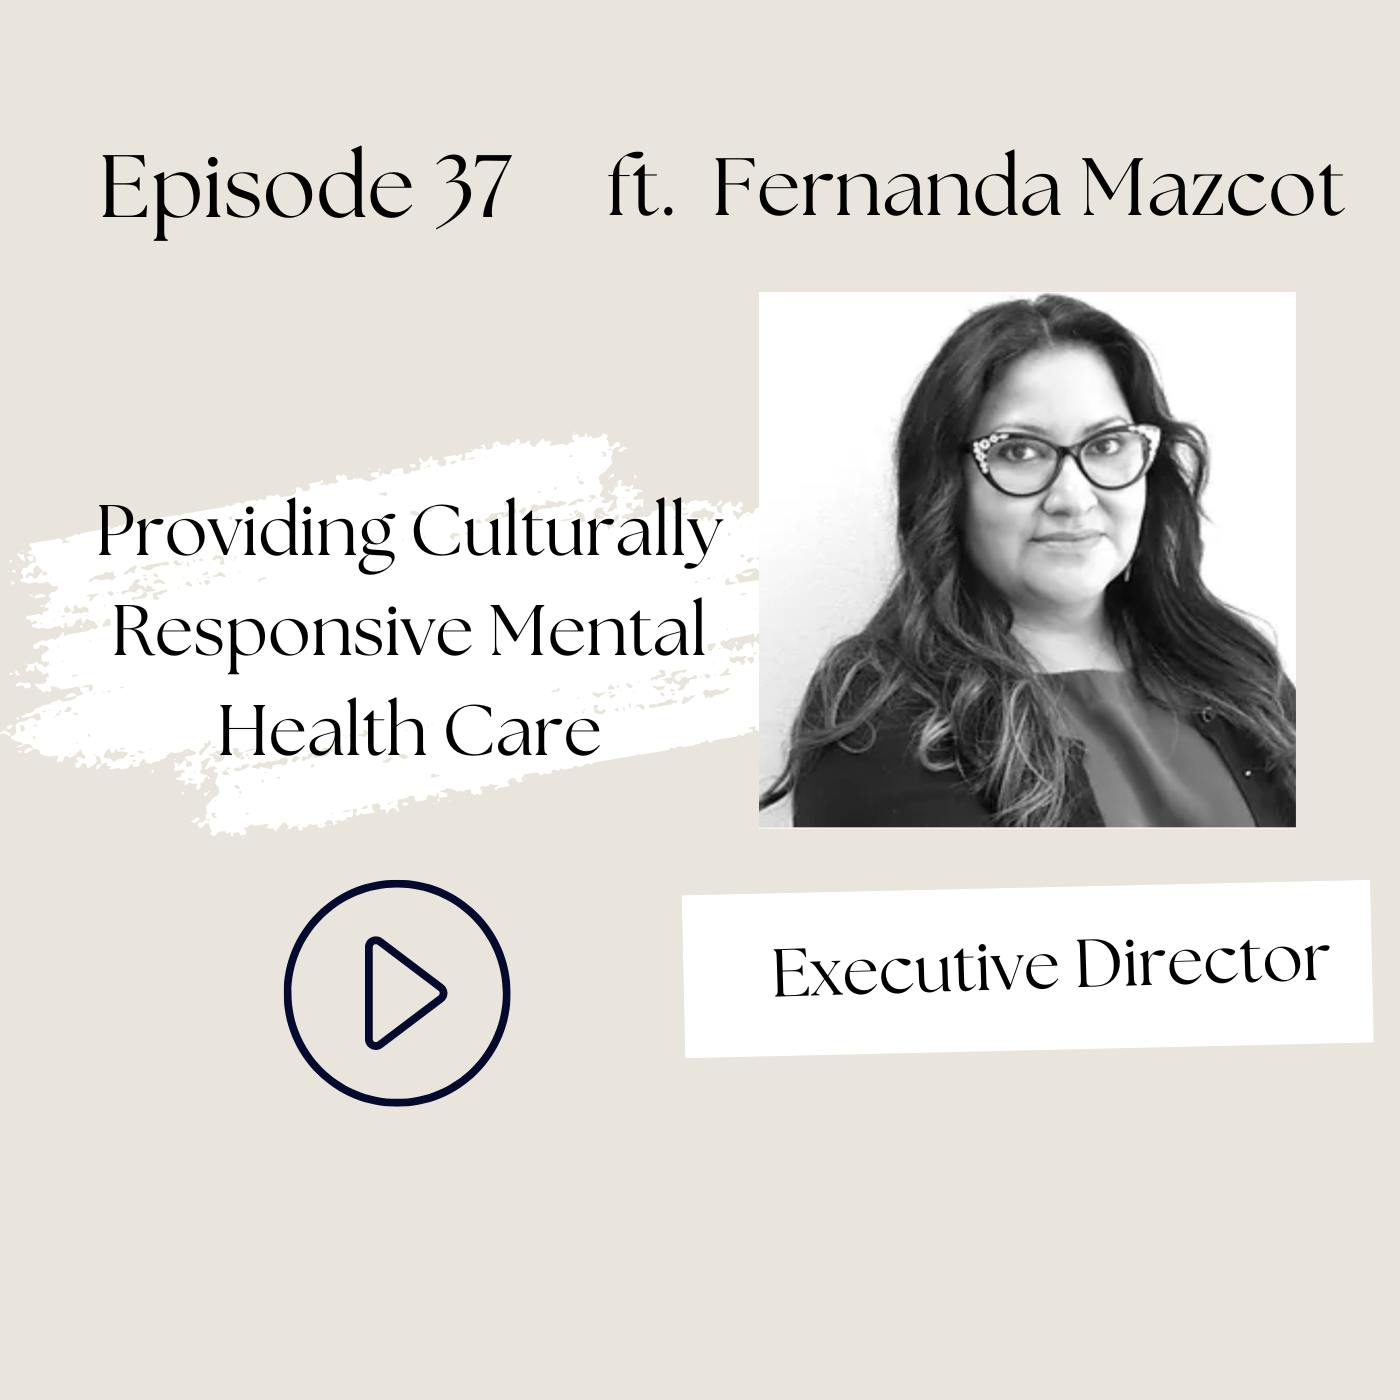 Solutions to the Mental Health Crisis—Culturally Responsive Mental Healthcare by BIPOC, for BIPOC Communities (Fernanda Mazcot, Ep 37))